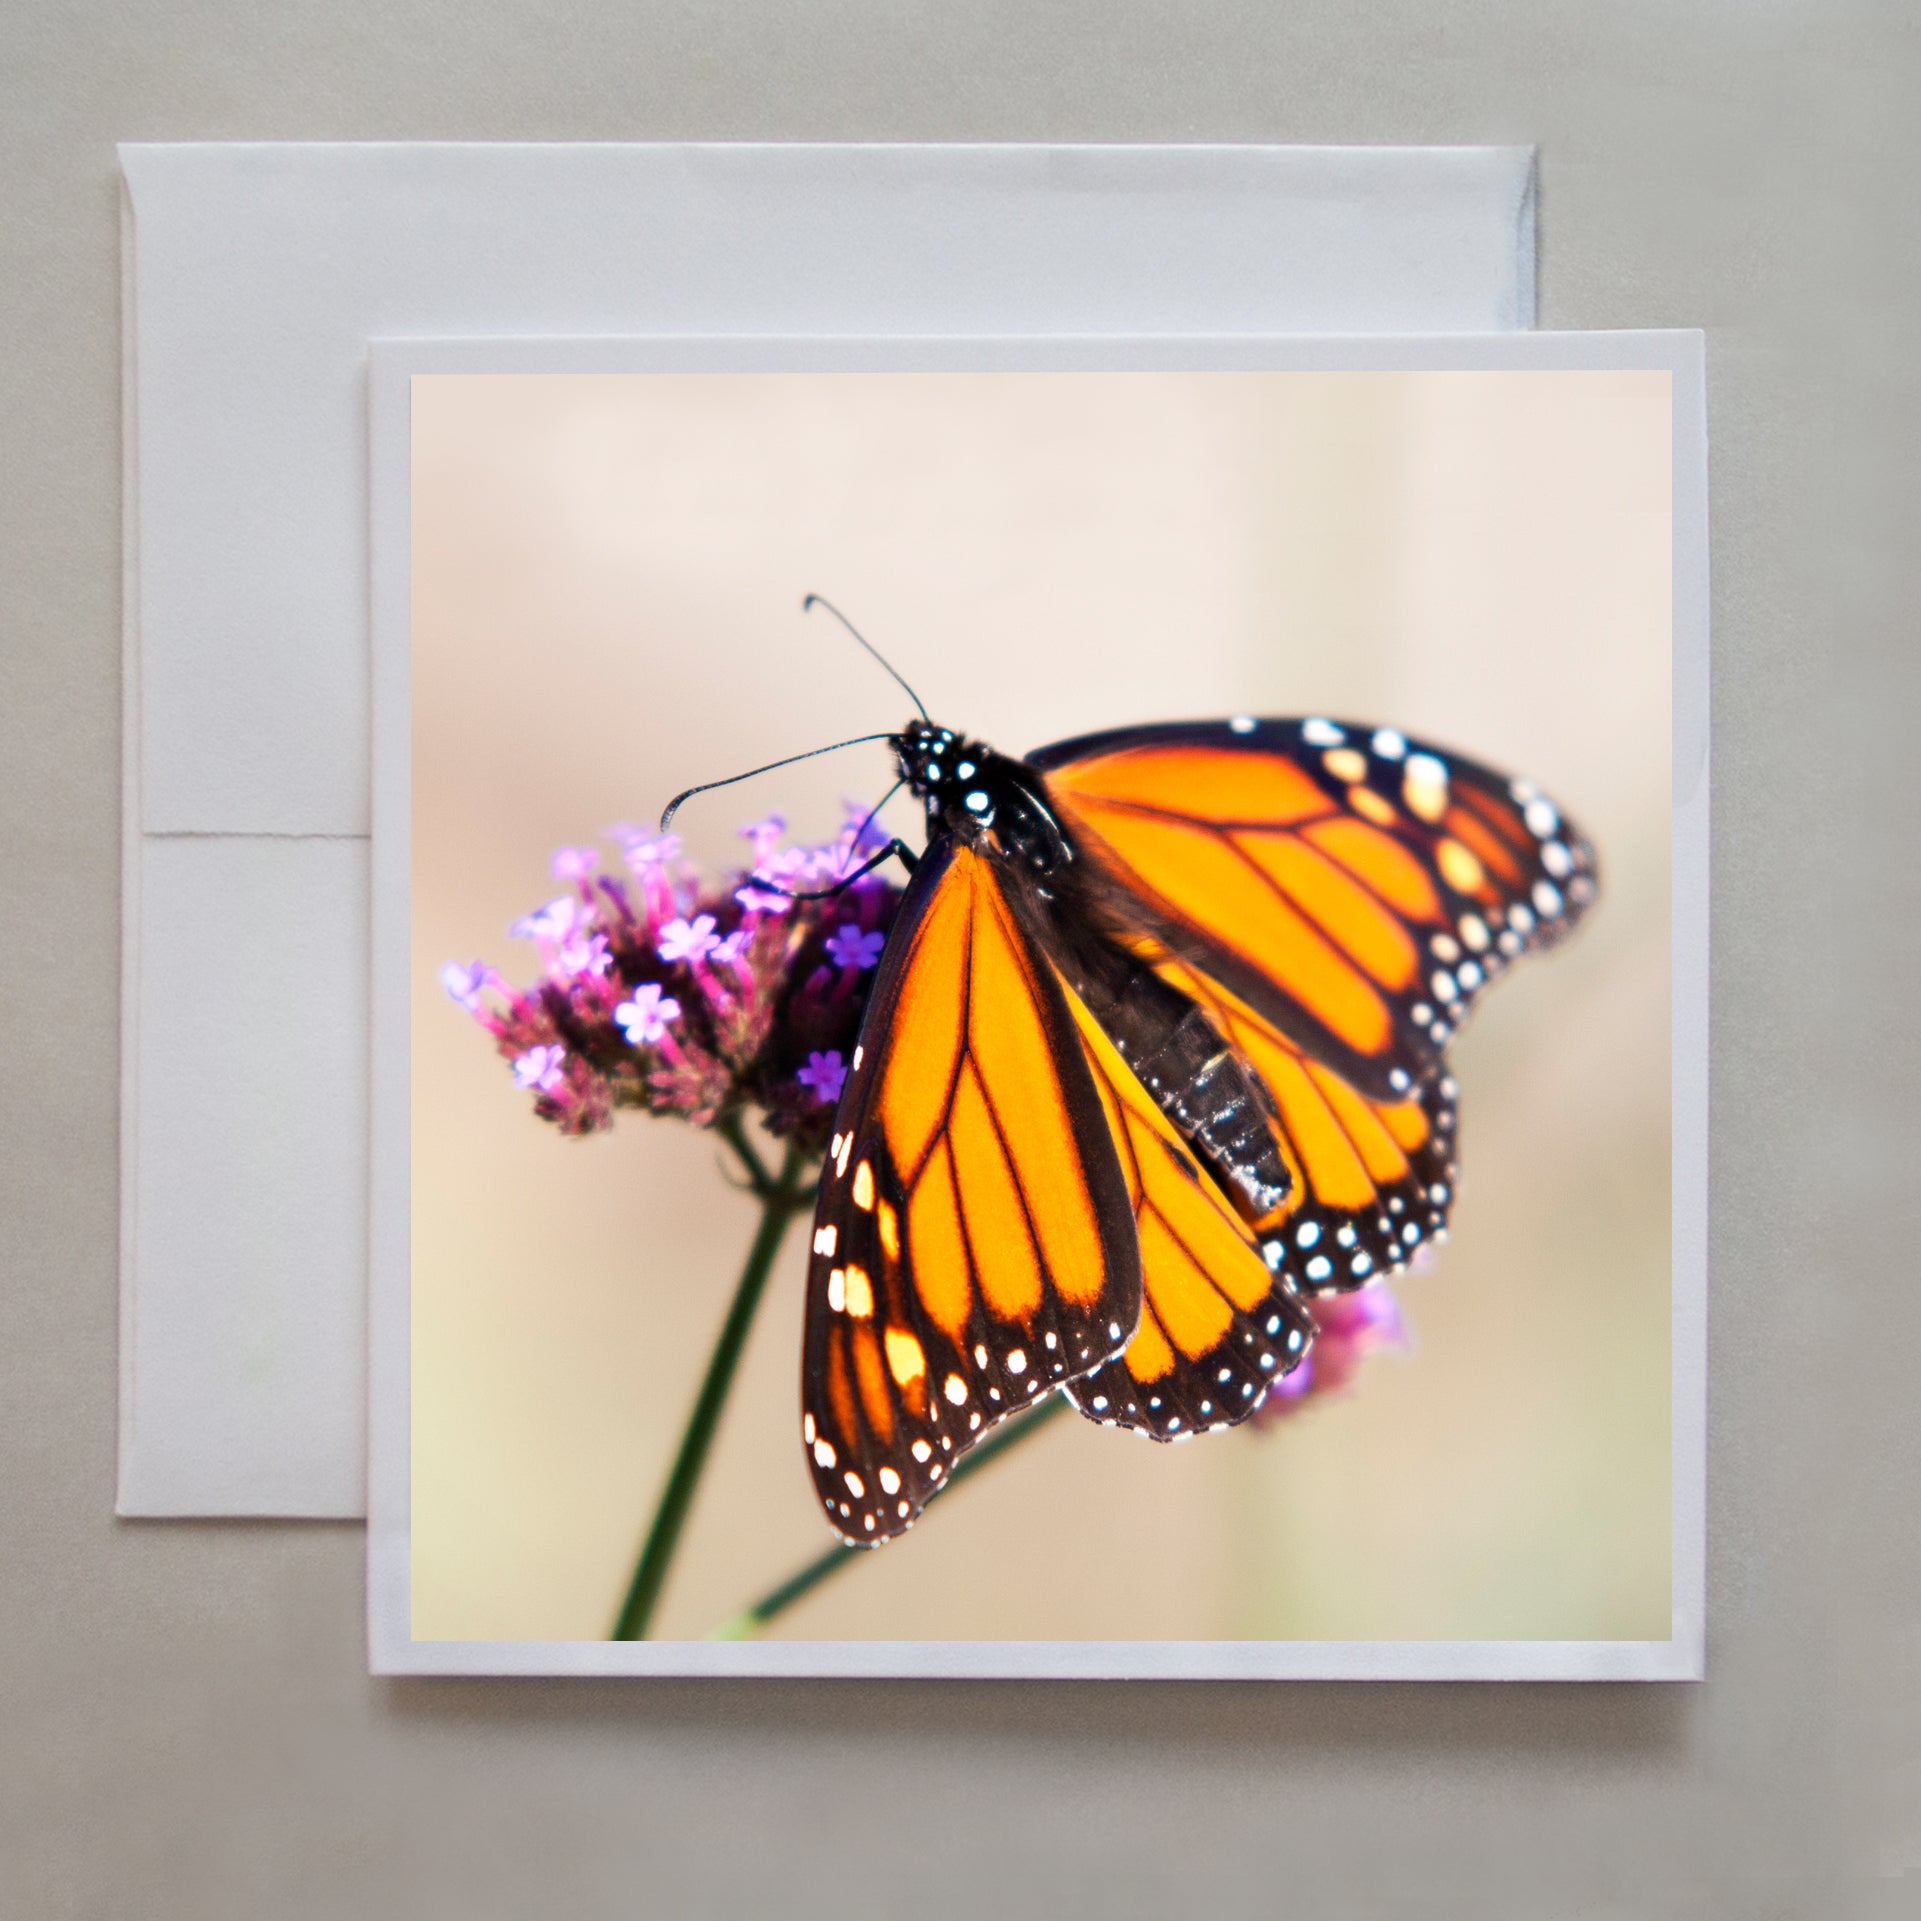 A beautiful, vibrant photograph of a Monarch butterfly feeding on pink and purple flowers by photographer Caley Taylor.